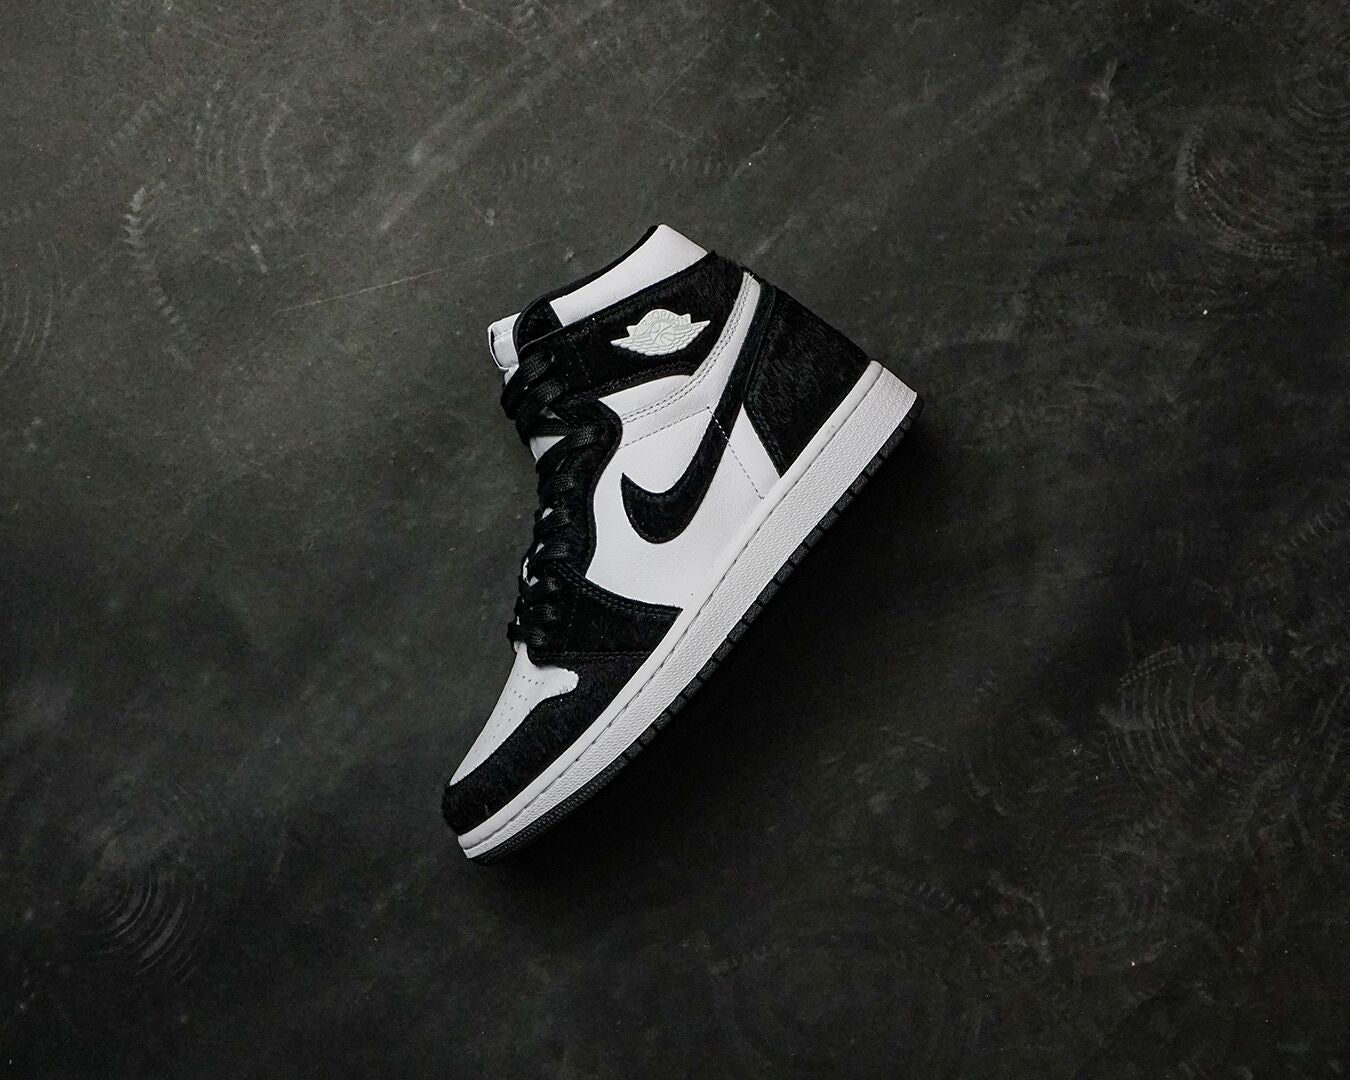 Another Air Jordan 1 High Zoom appears with 'Rookie.Instagram